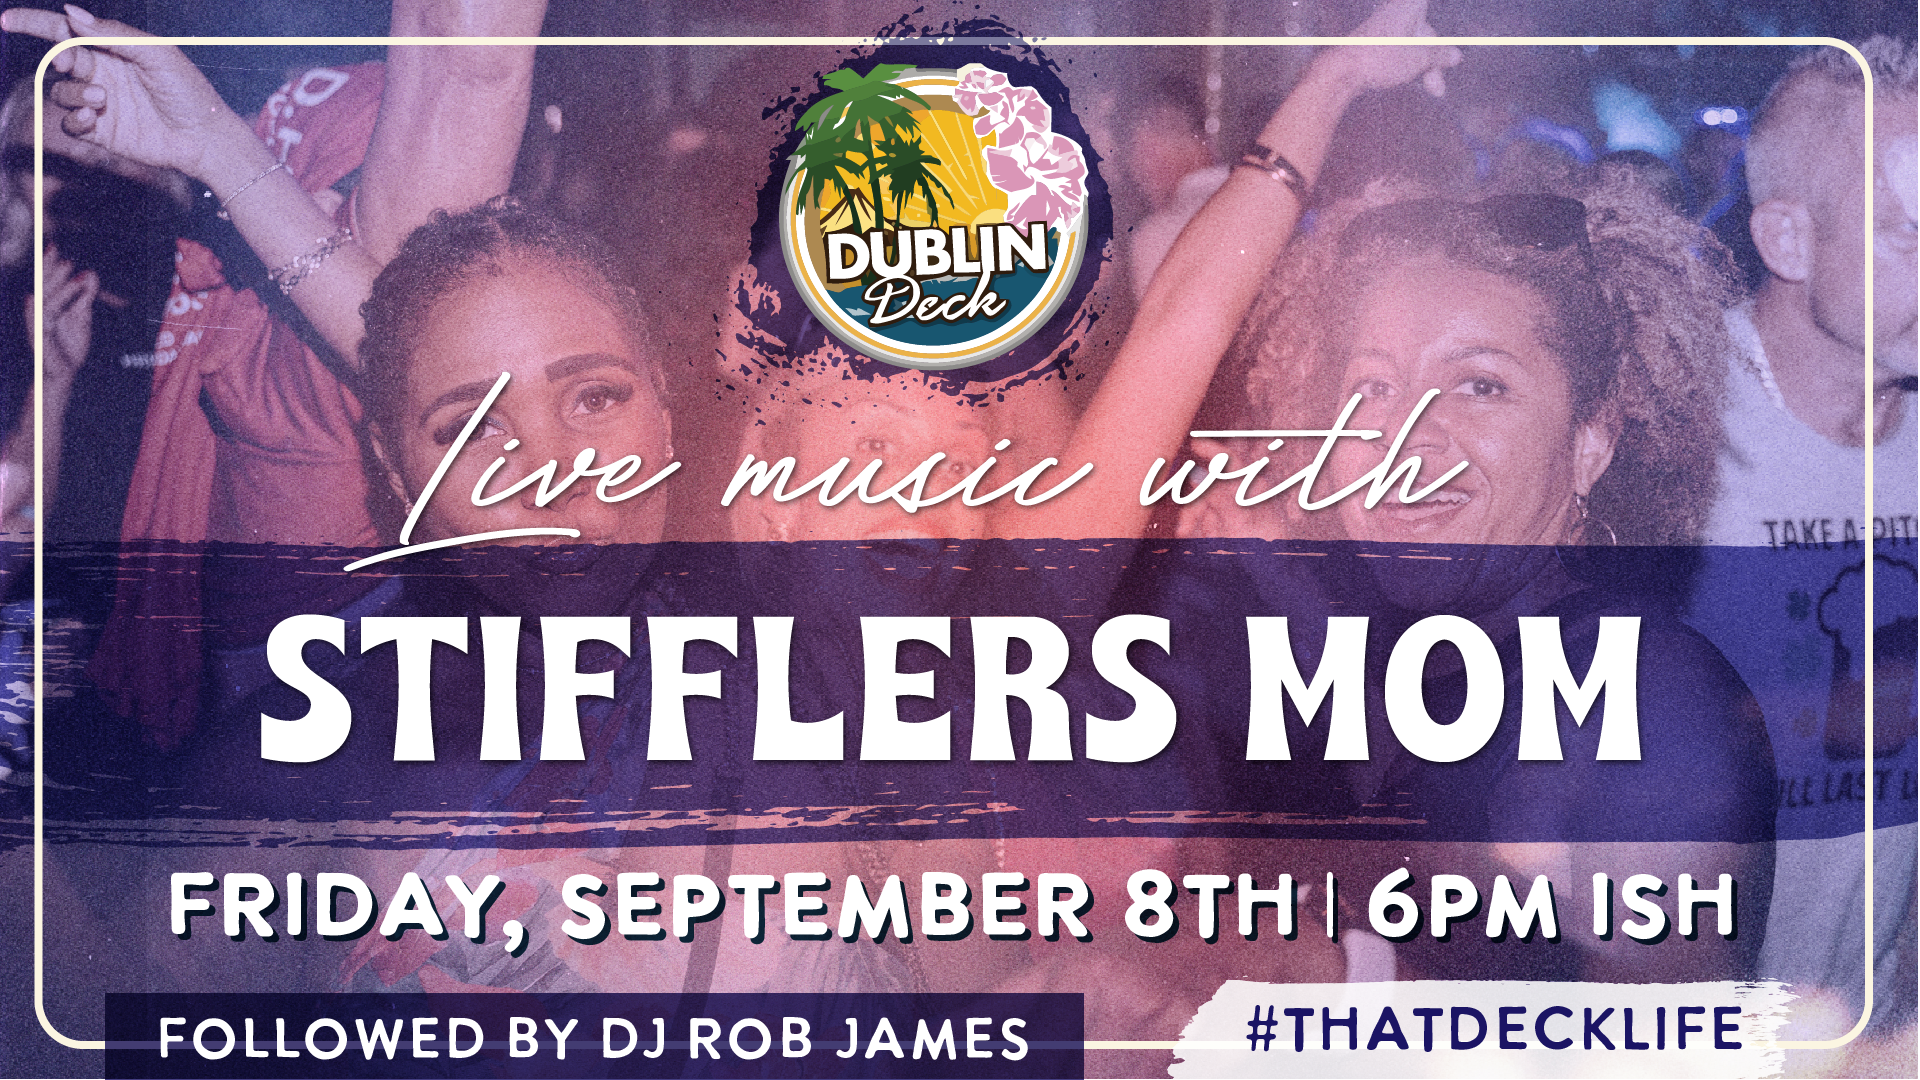 Start your weekend off with Stifflers Mom on stage at 6PM-ish!